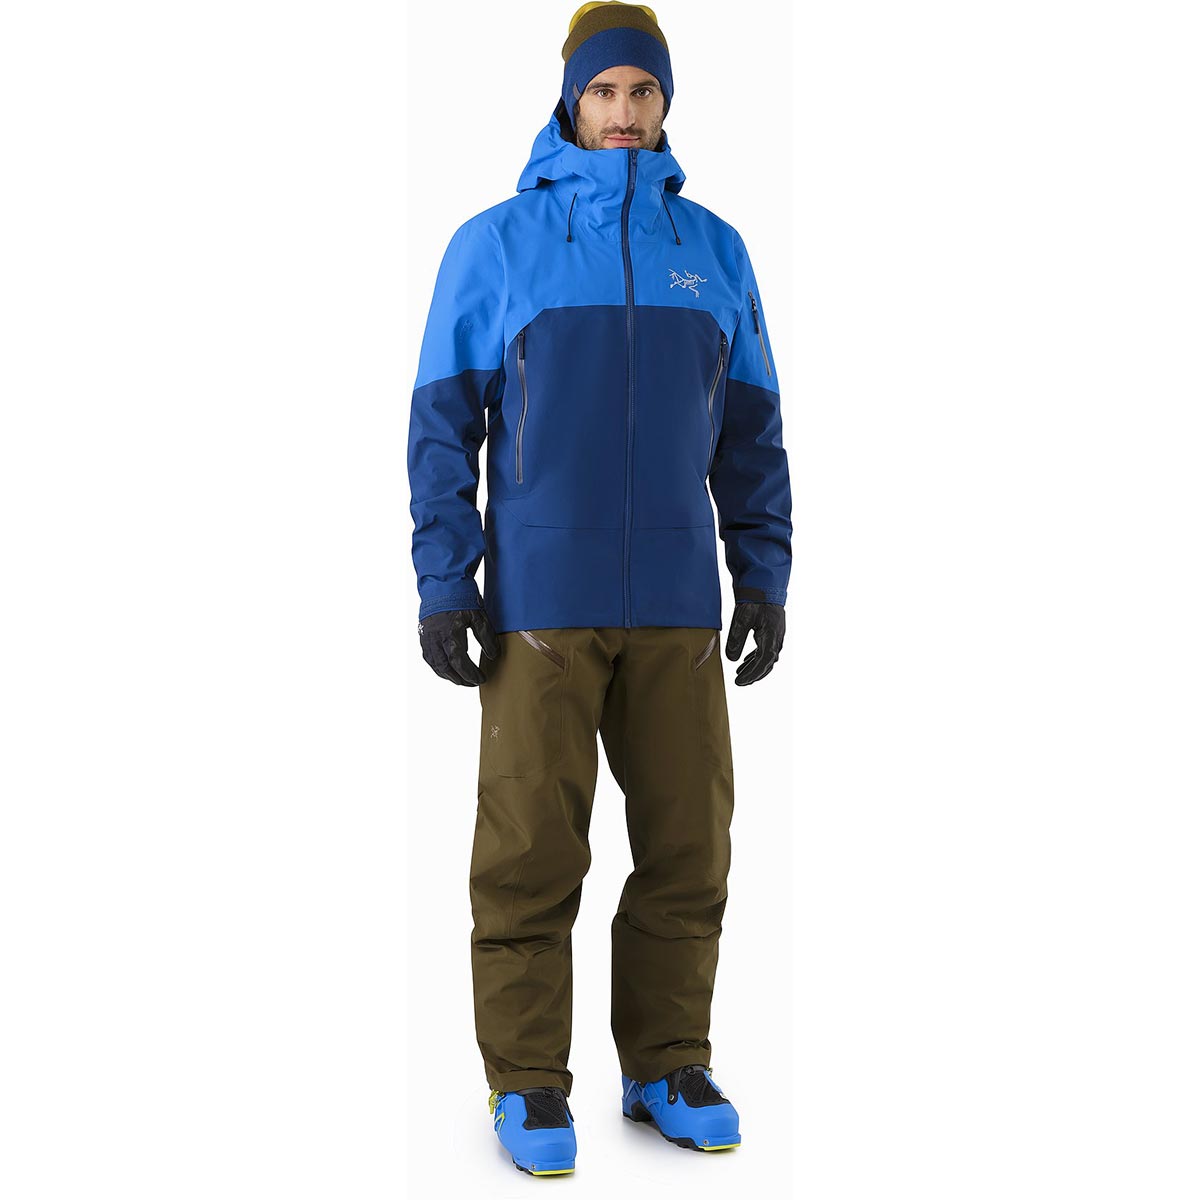 Arc'teryx Rush Jacket, men's, discontinued Fall 2017 colors (free 